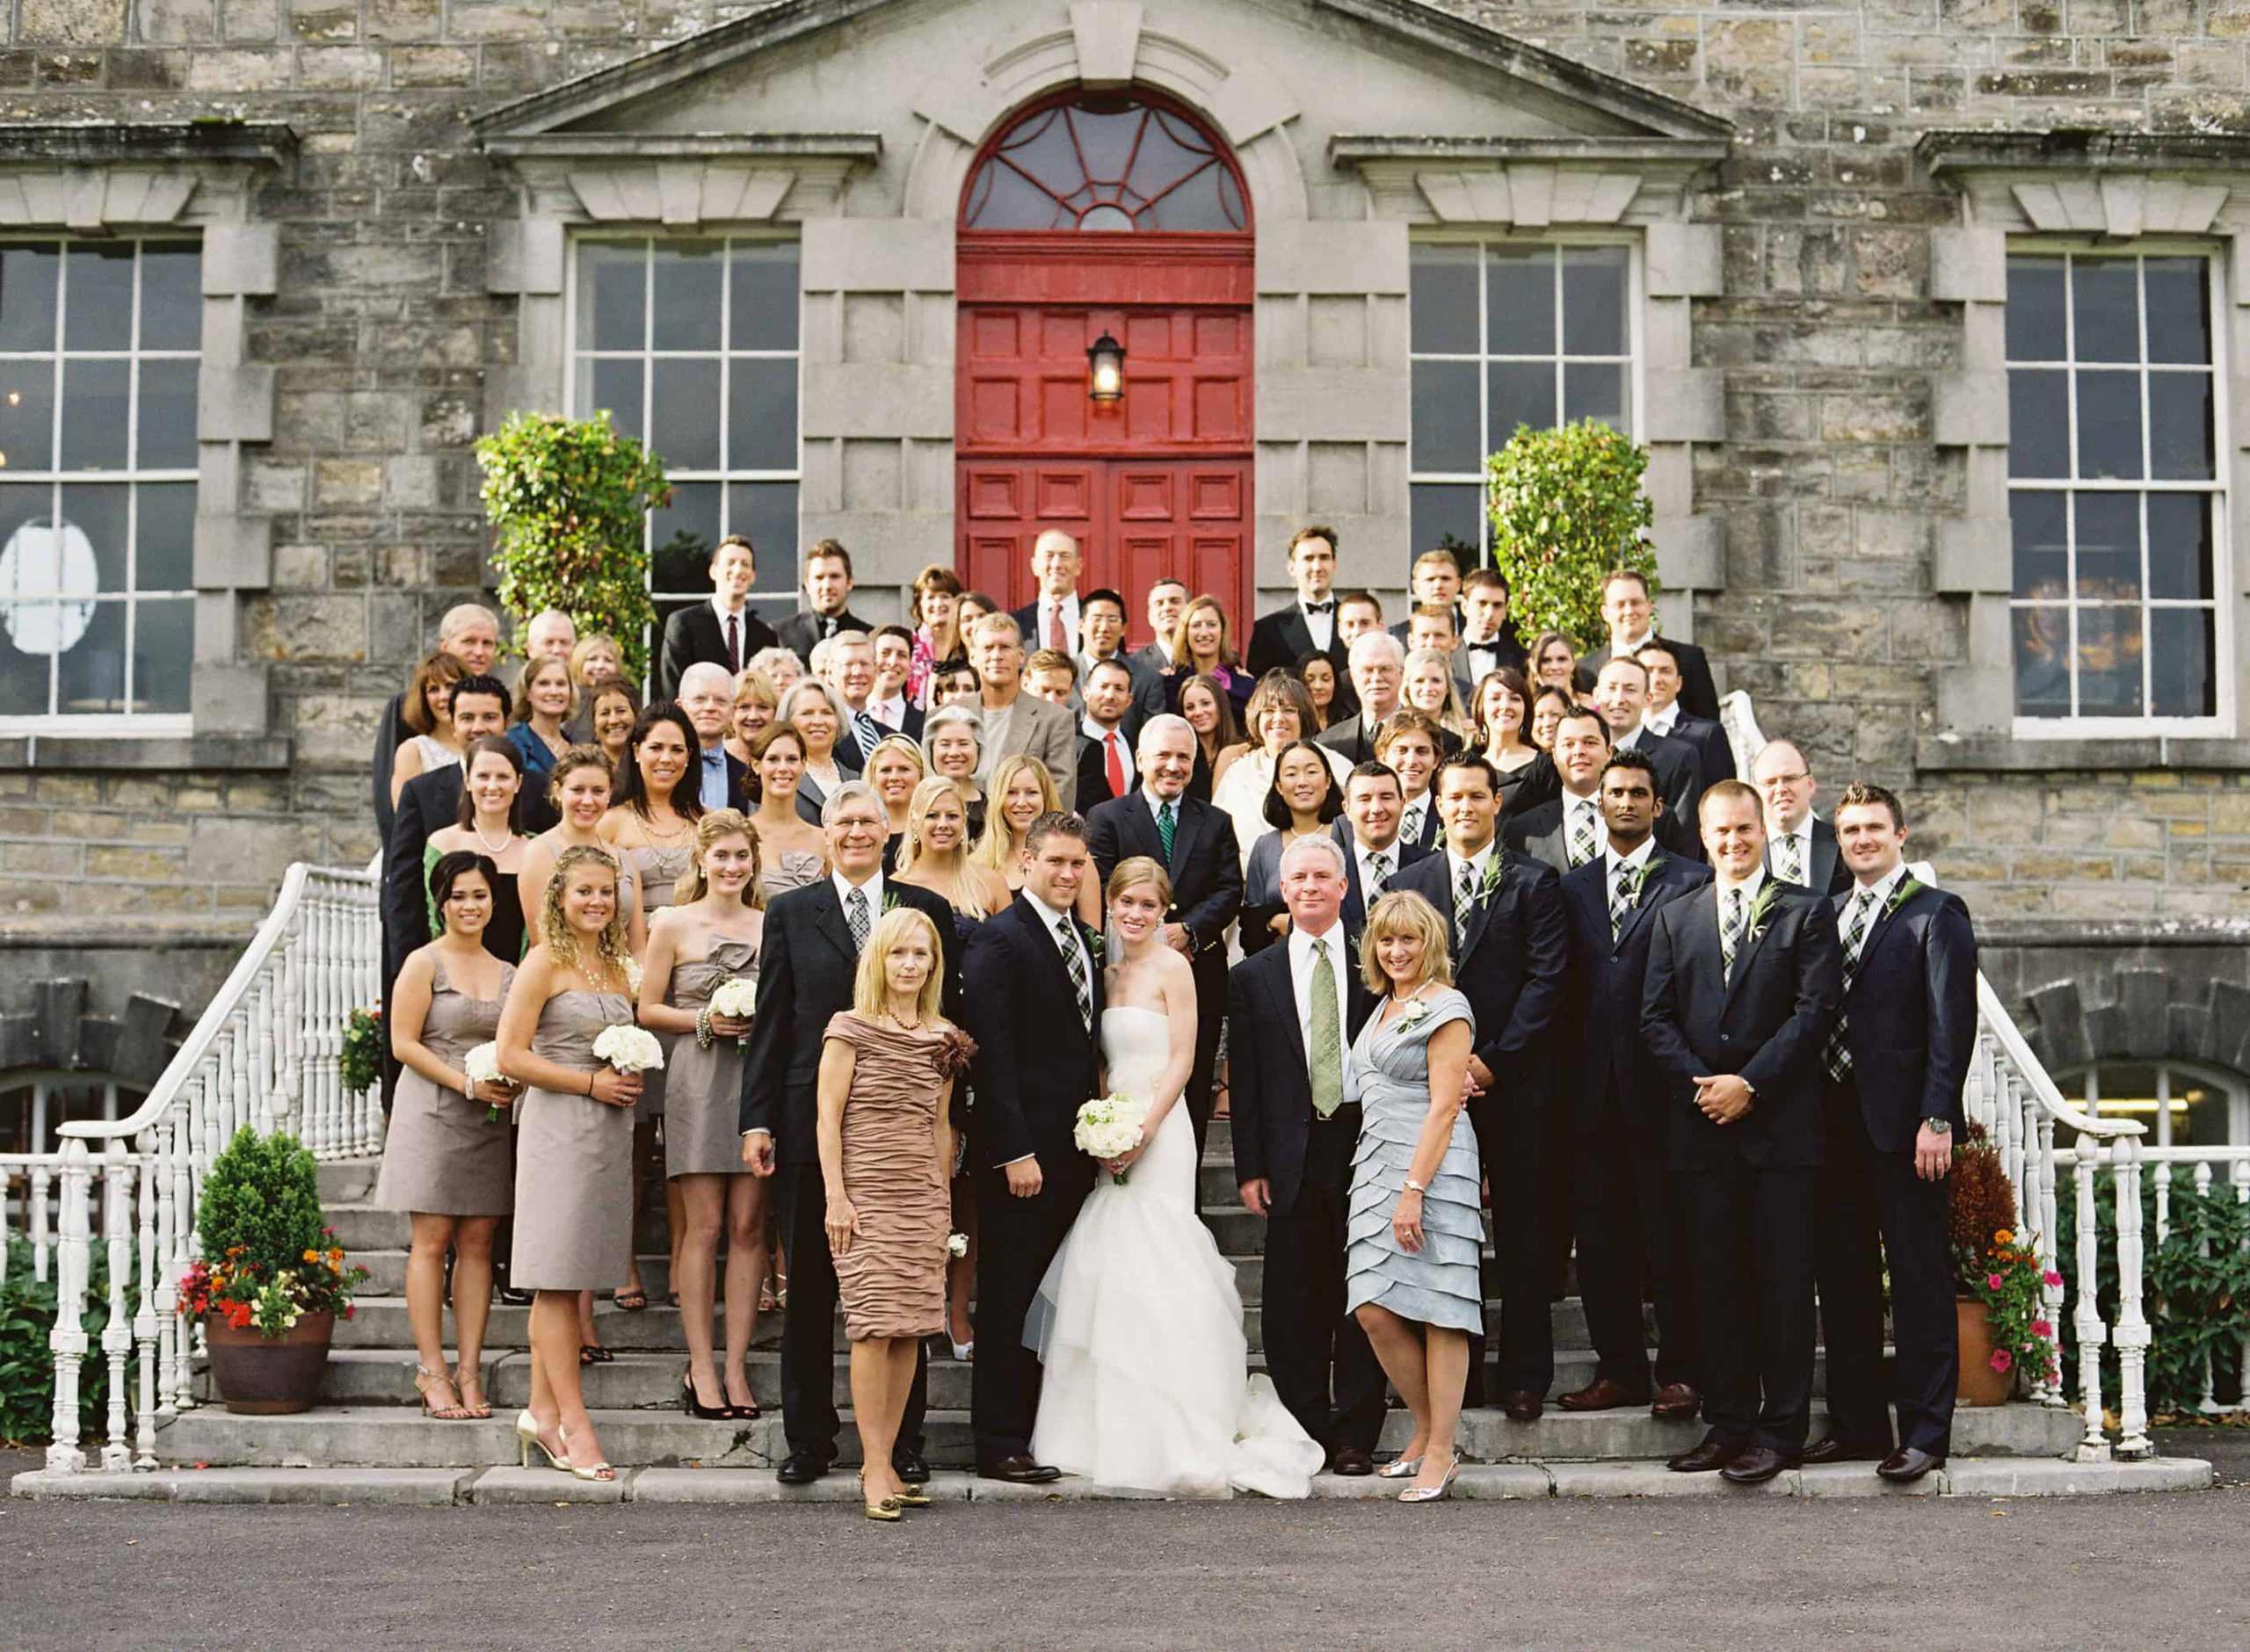 Group photo of the entire wedding